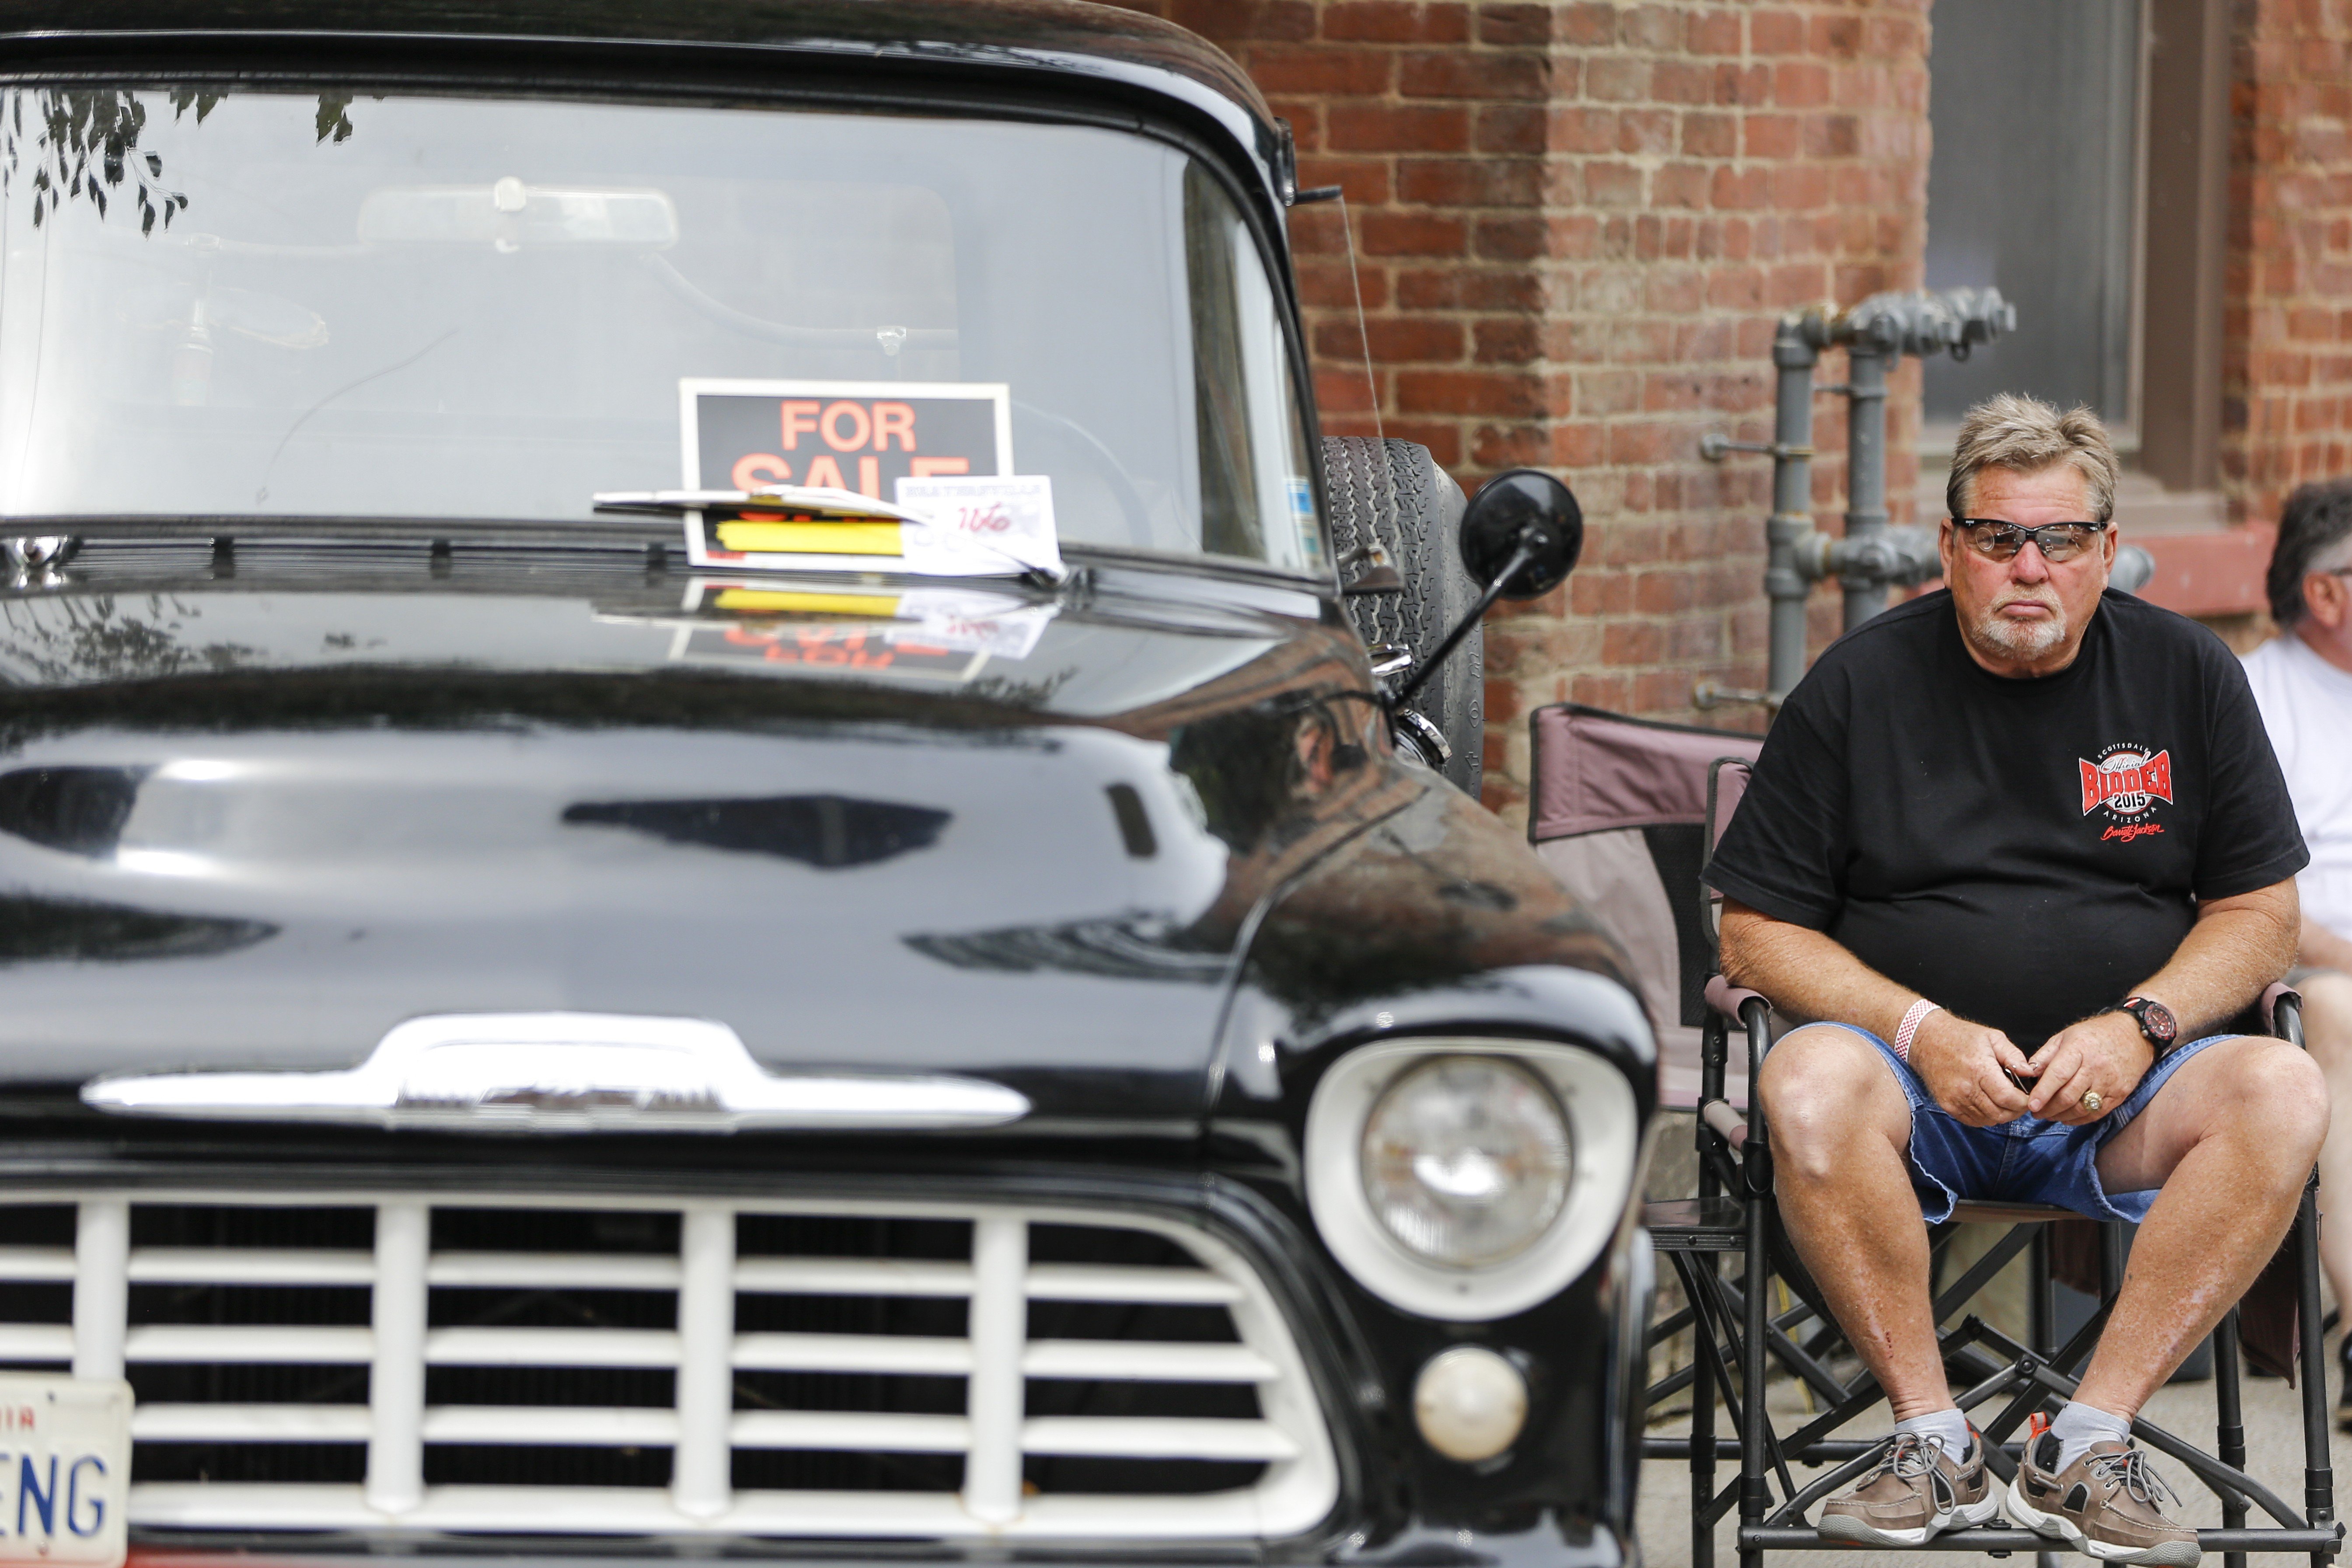 Kenny Hoerter Sr. sits by his car at the Beatersville Car and Bike show. Hoerter owns a shop in Butchertown where he keeps his pristine hotrods and memorabilia from as early as the 1940&#146;s. &#147;I just like lookin&#146; in the past I guess.&#148;